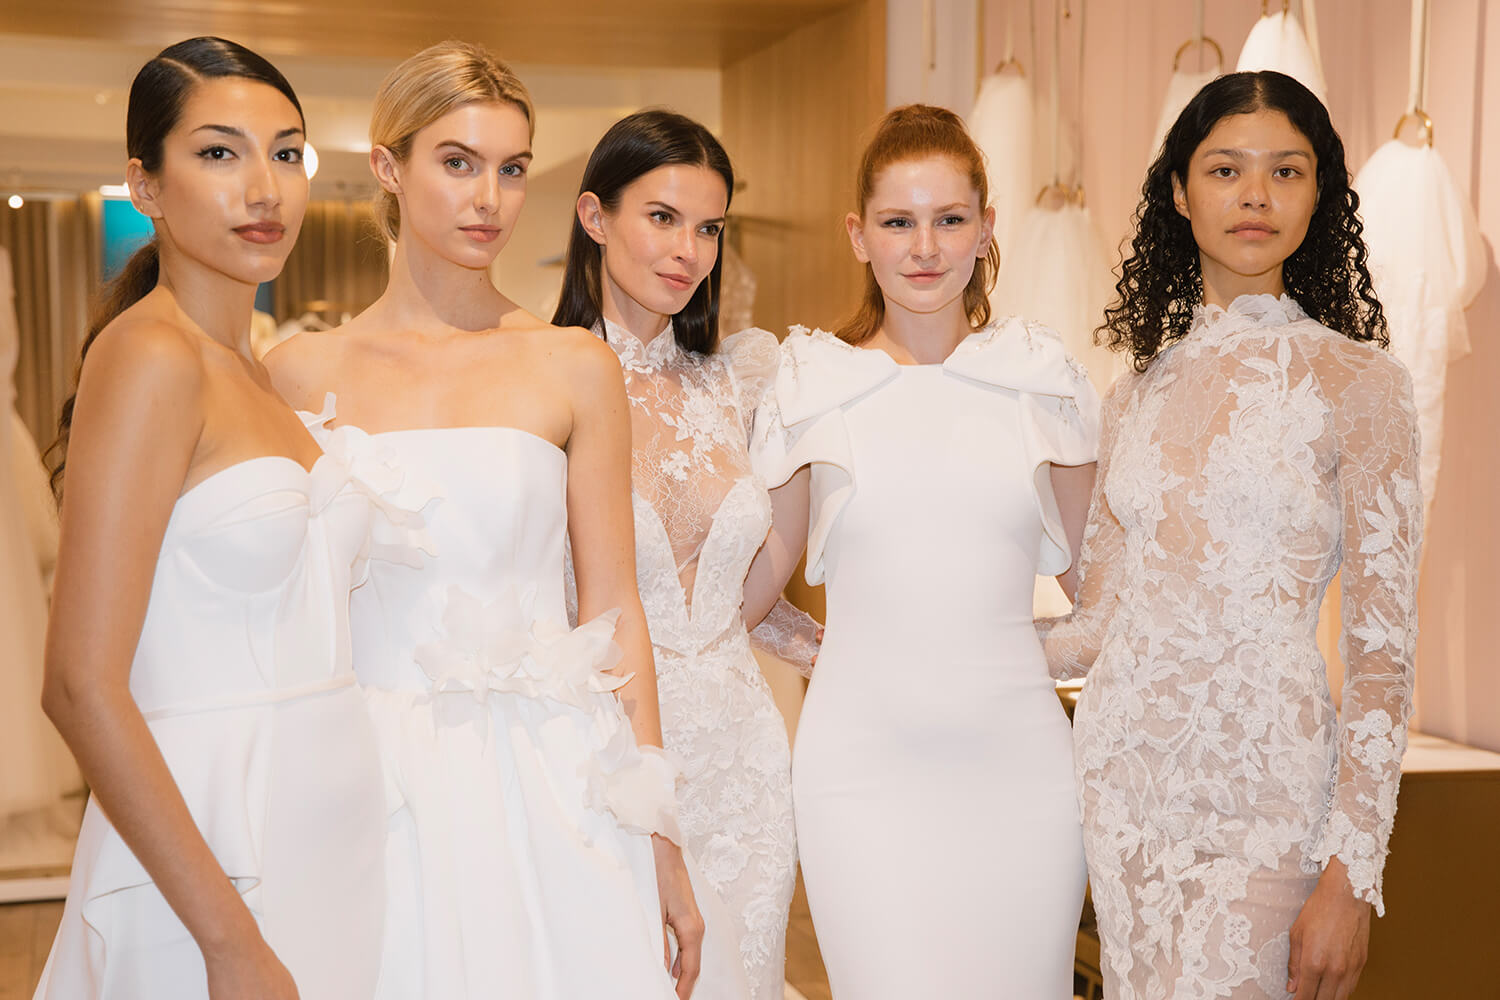 New York Bridal Fashion Week Sets the 2023 Trends!